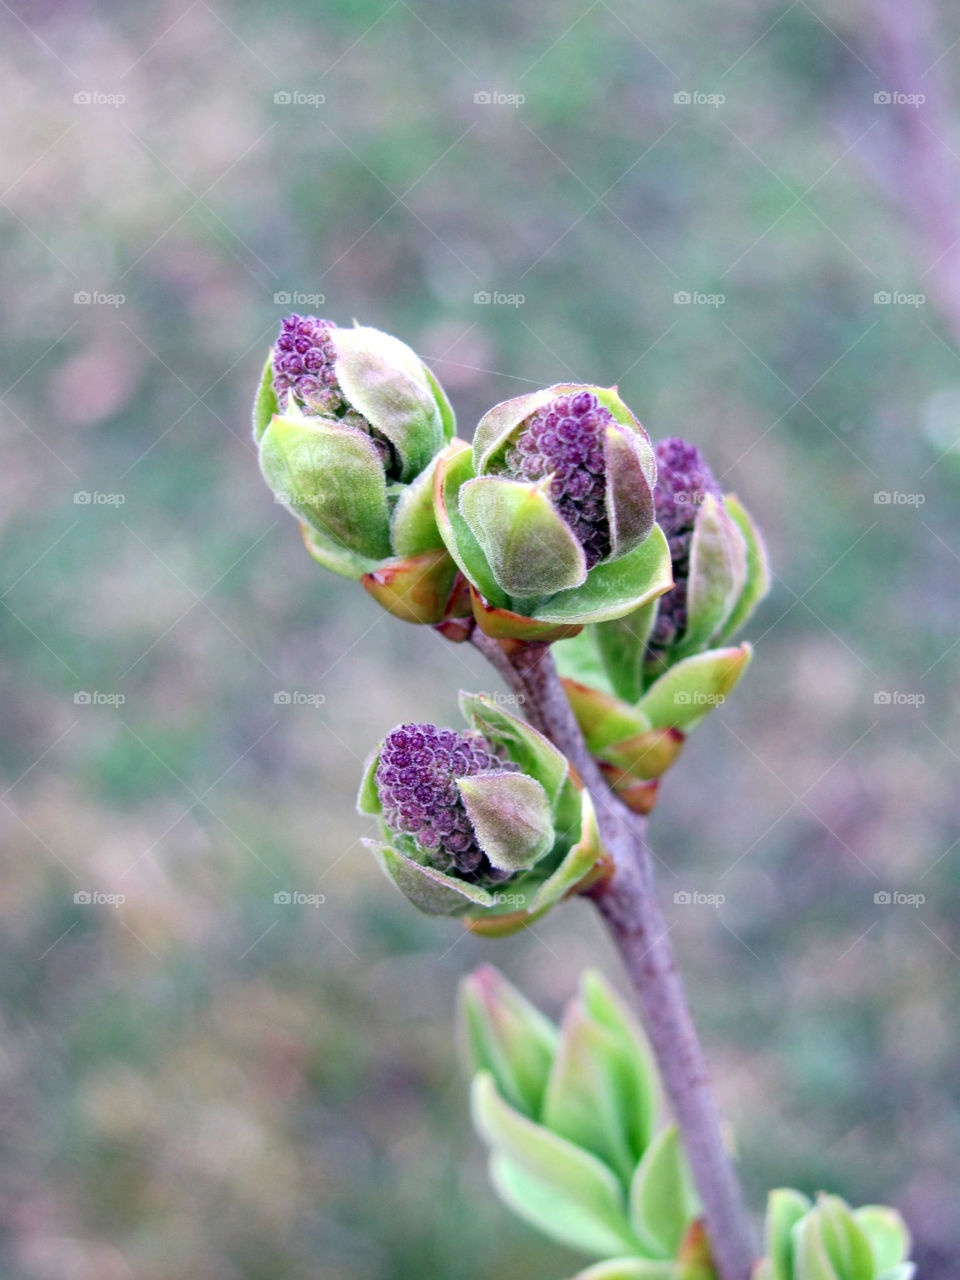 Lilac buds ready to bloom